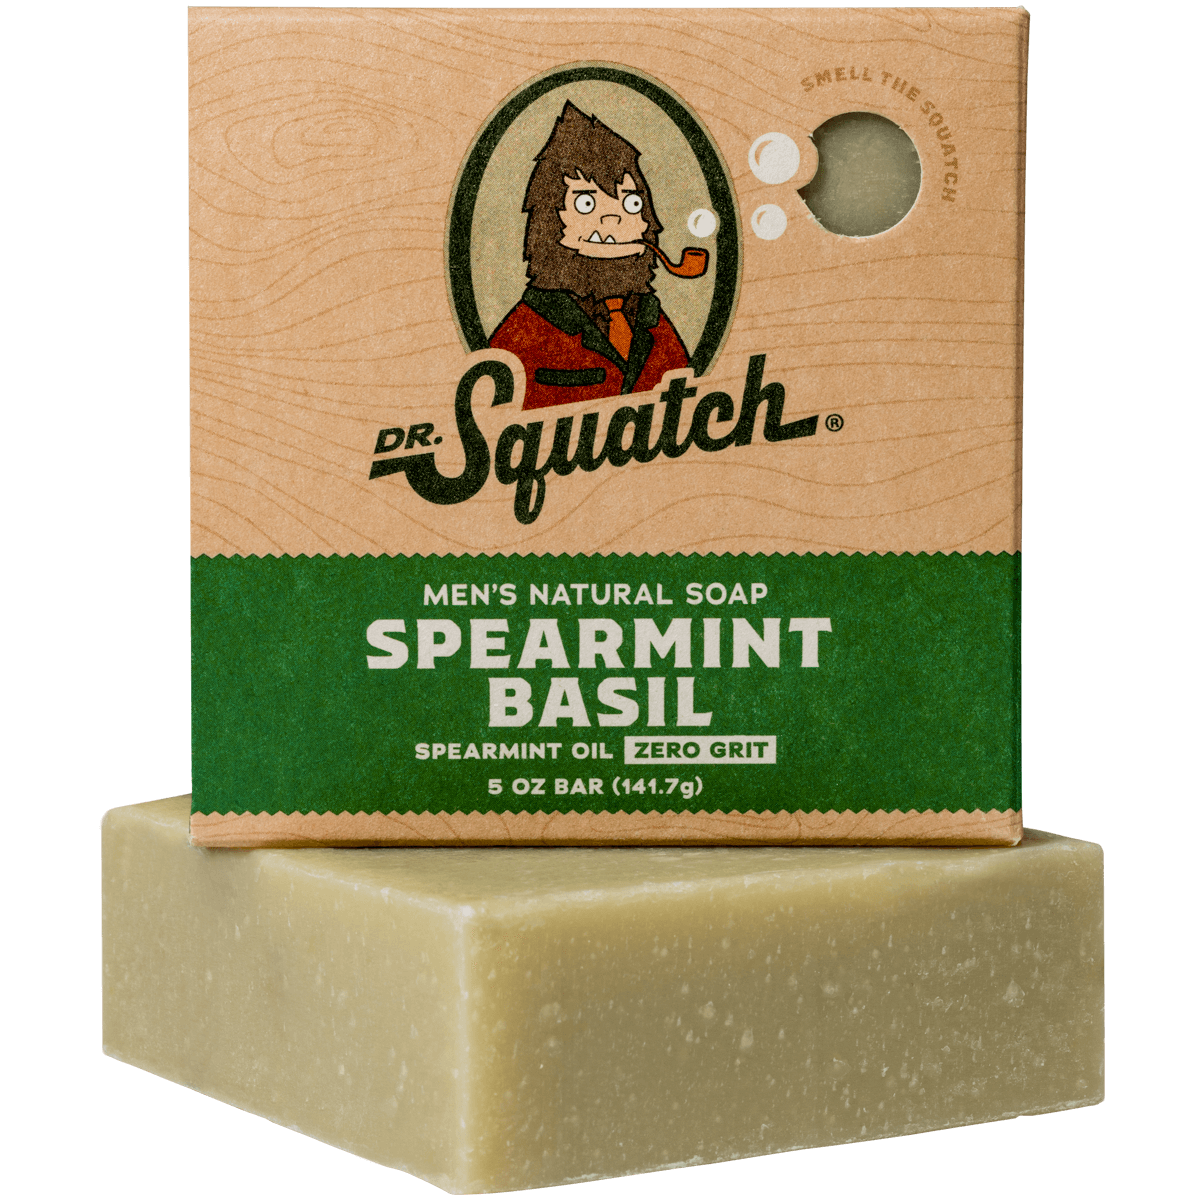 Dr. Squatch Review: Total Sudisfaction from Nature?